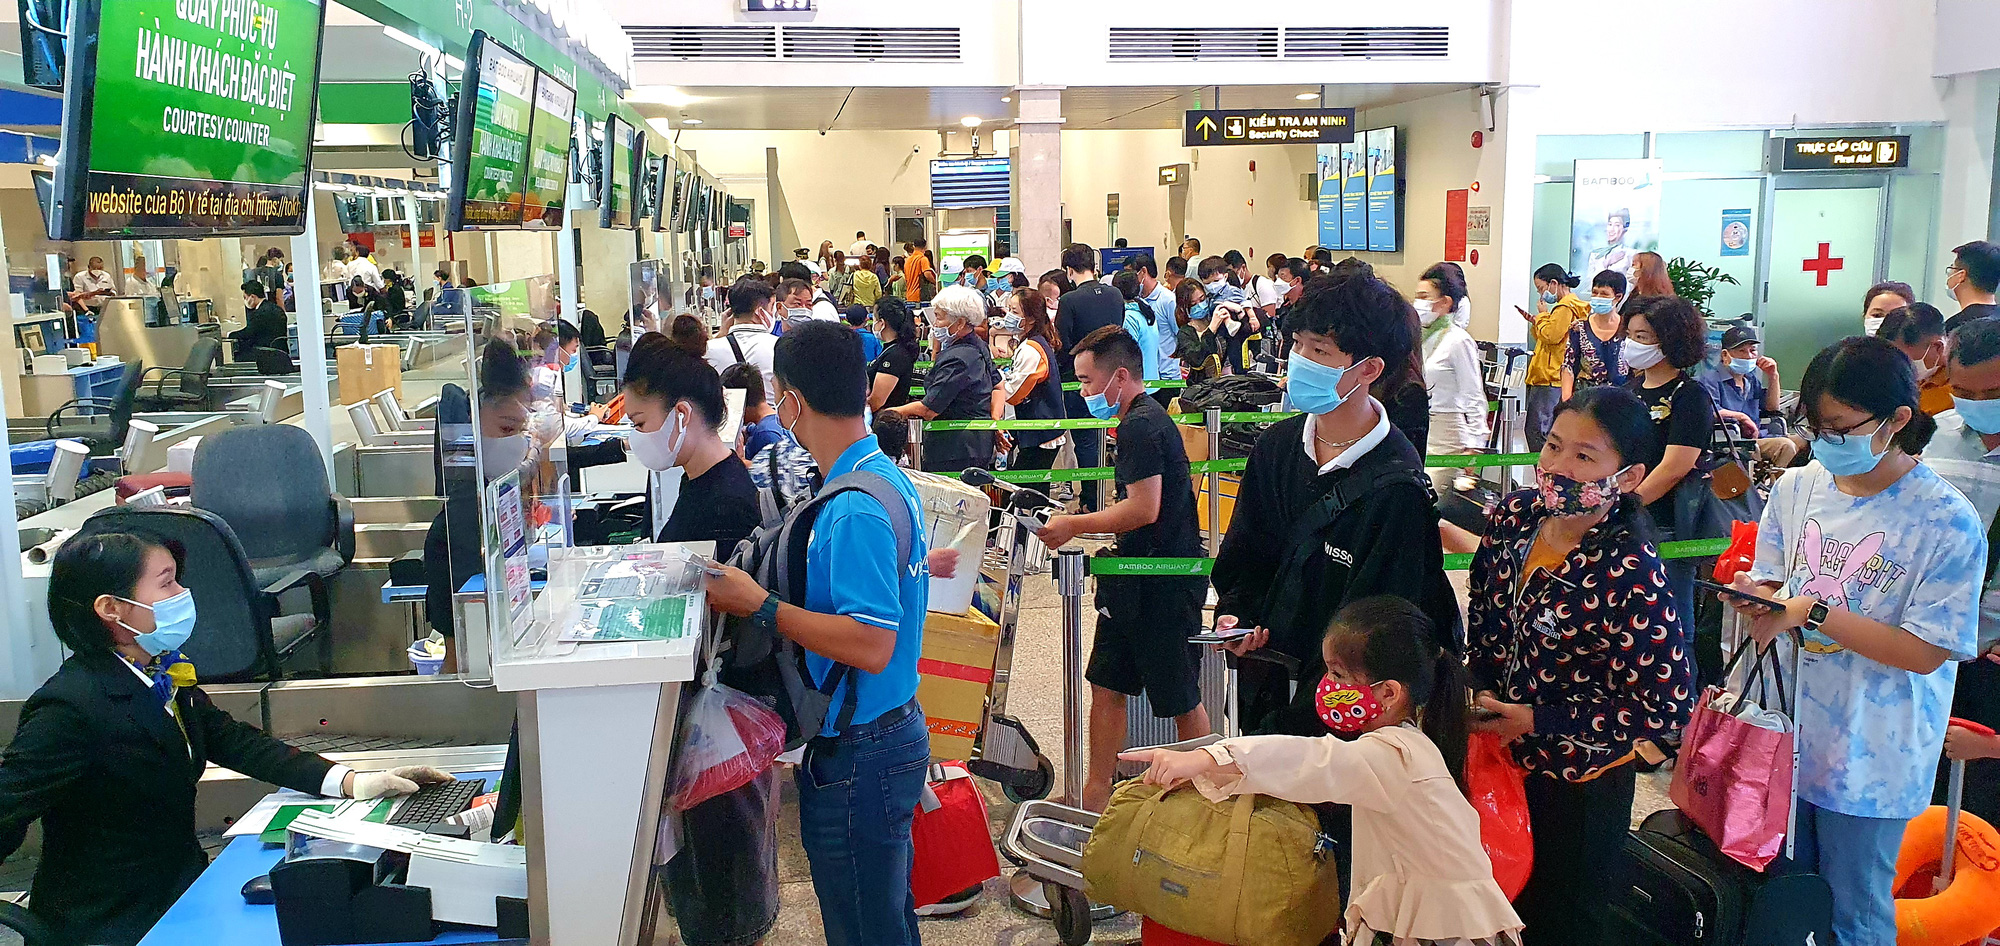 Airlines must refund service charges for canceled tickets: Vietnam aviation authority